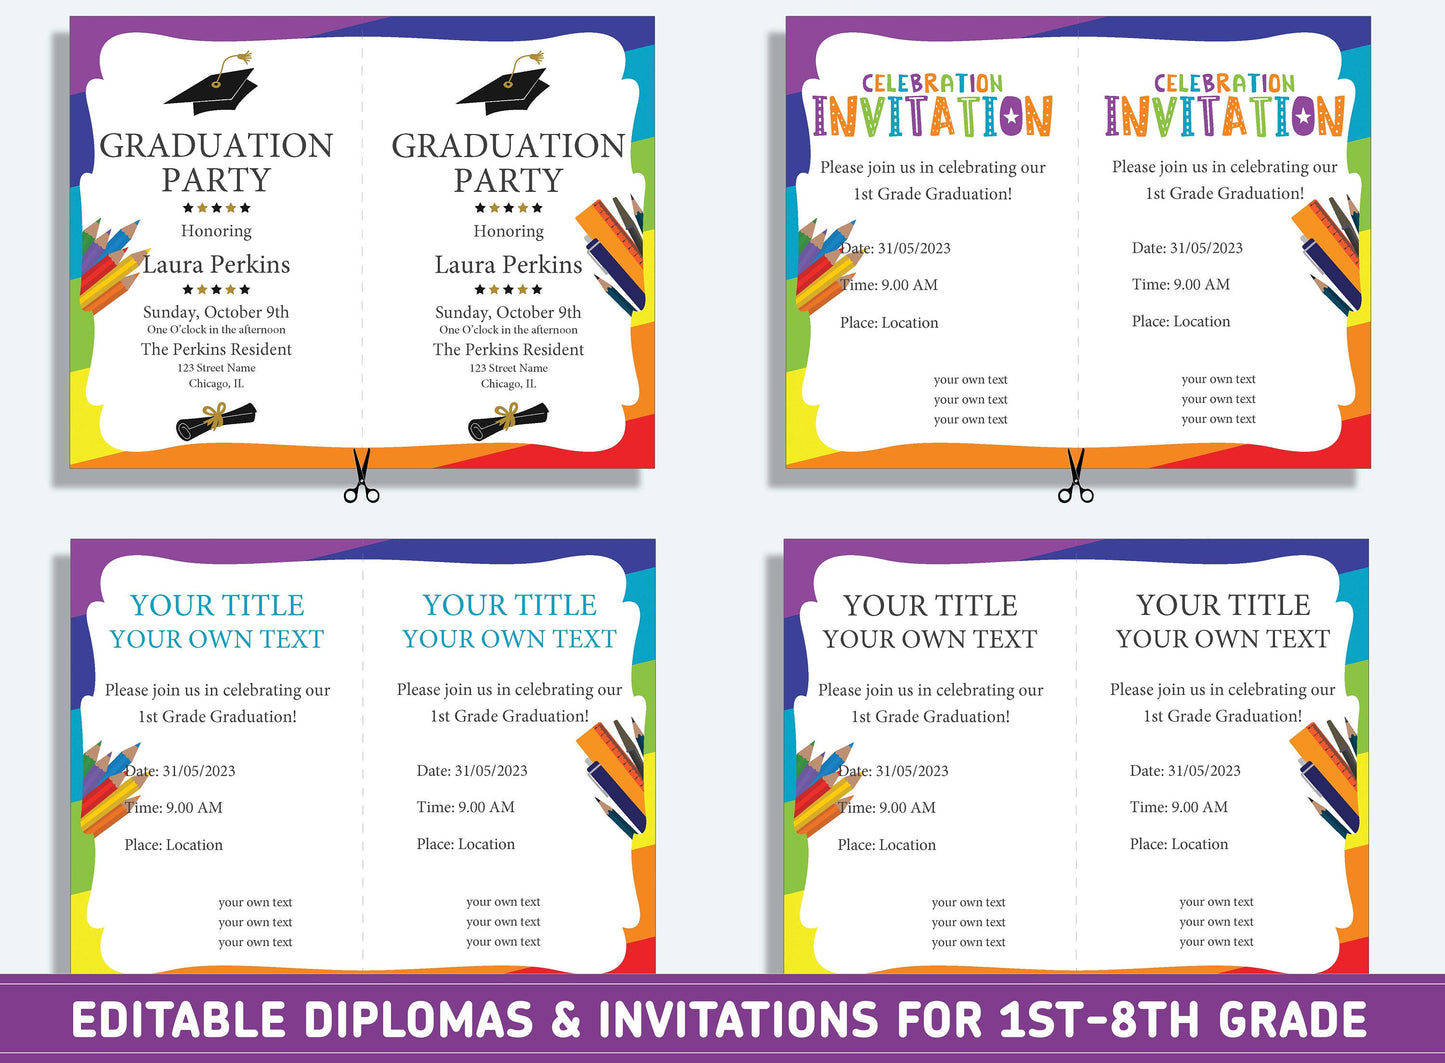 Editable Second Grade Diploma, 1st to 8th Grade Diploma, Certificate of Completion & Invitation, PDF File, Instant Download